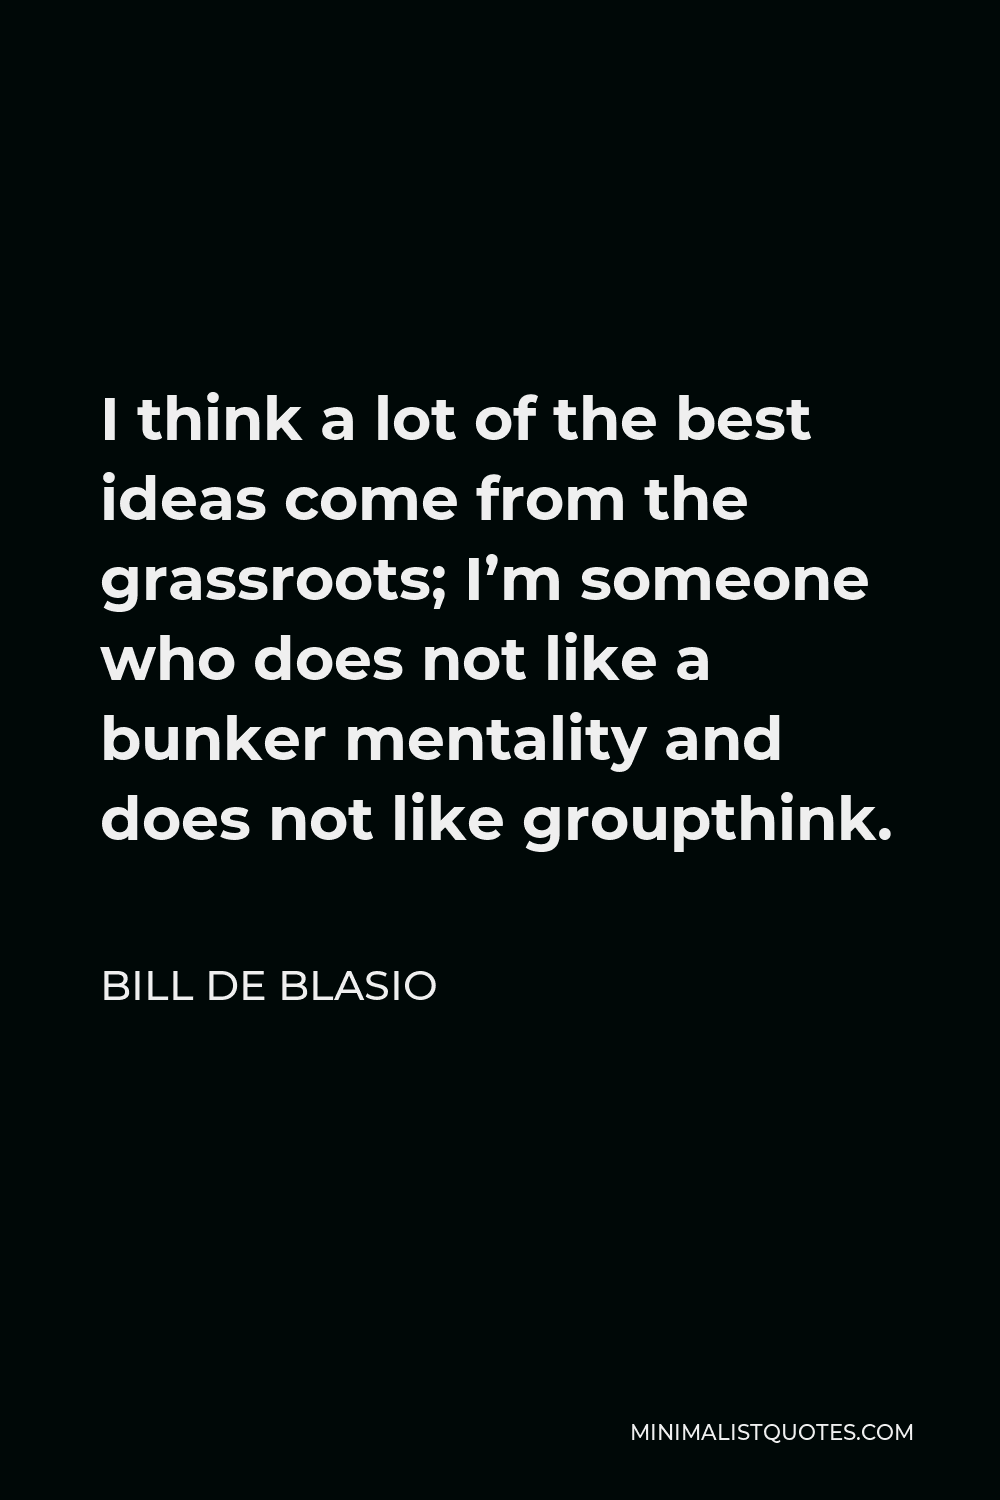 Bill de Blasio Quote - I think a lot of the best ideas come from the grassroots; I’m someone who does not like a bunker mentality and does not like groupthink.